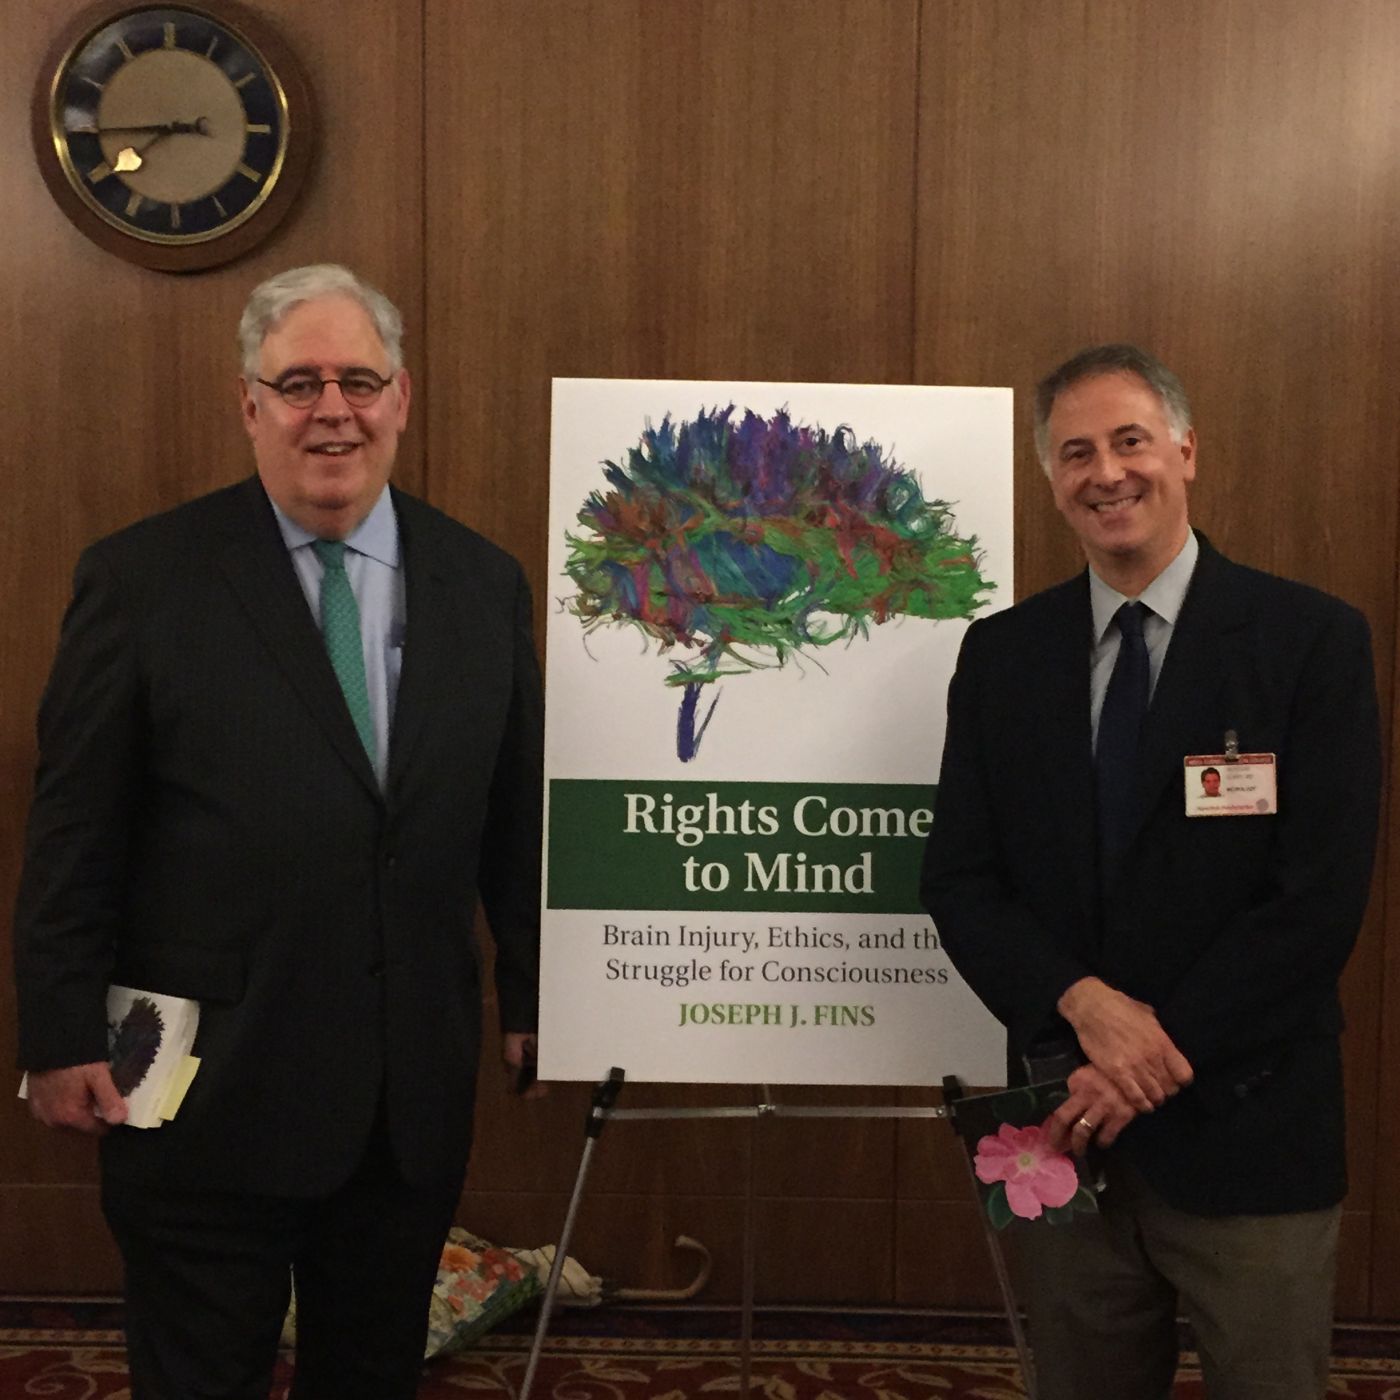 Drs. Fins and Schiff at Dr. Fins's book talk